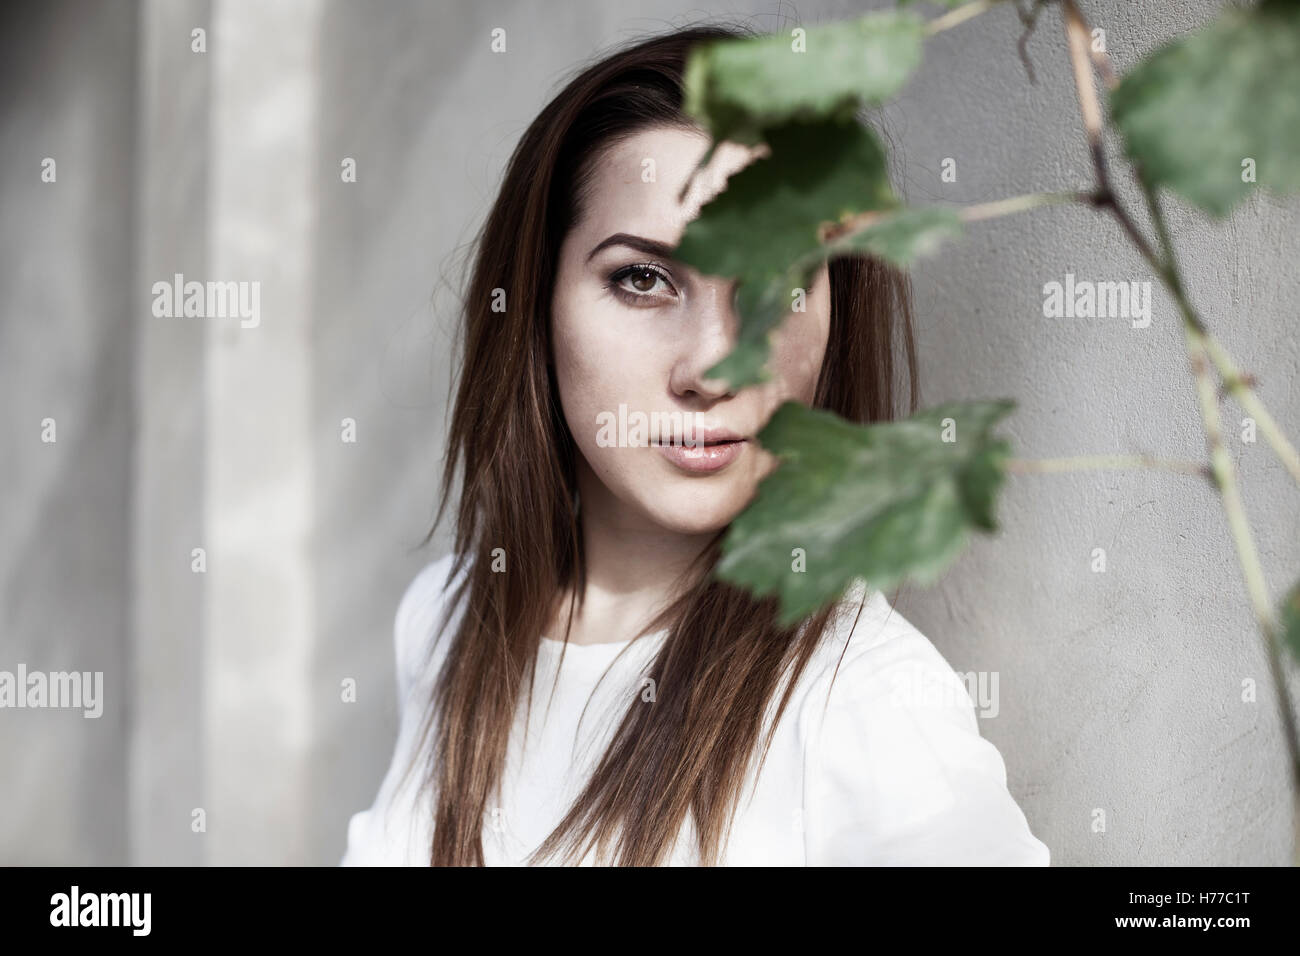 Portrait of a woman with face obscured by leaves Stock Photo